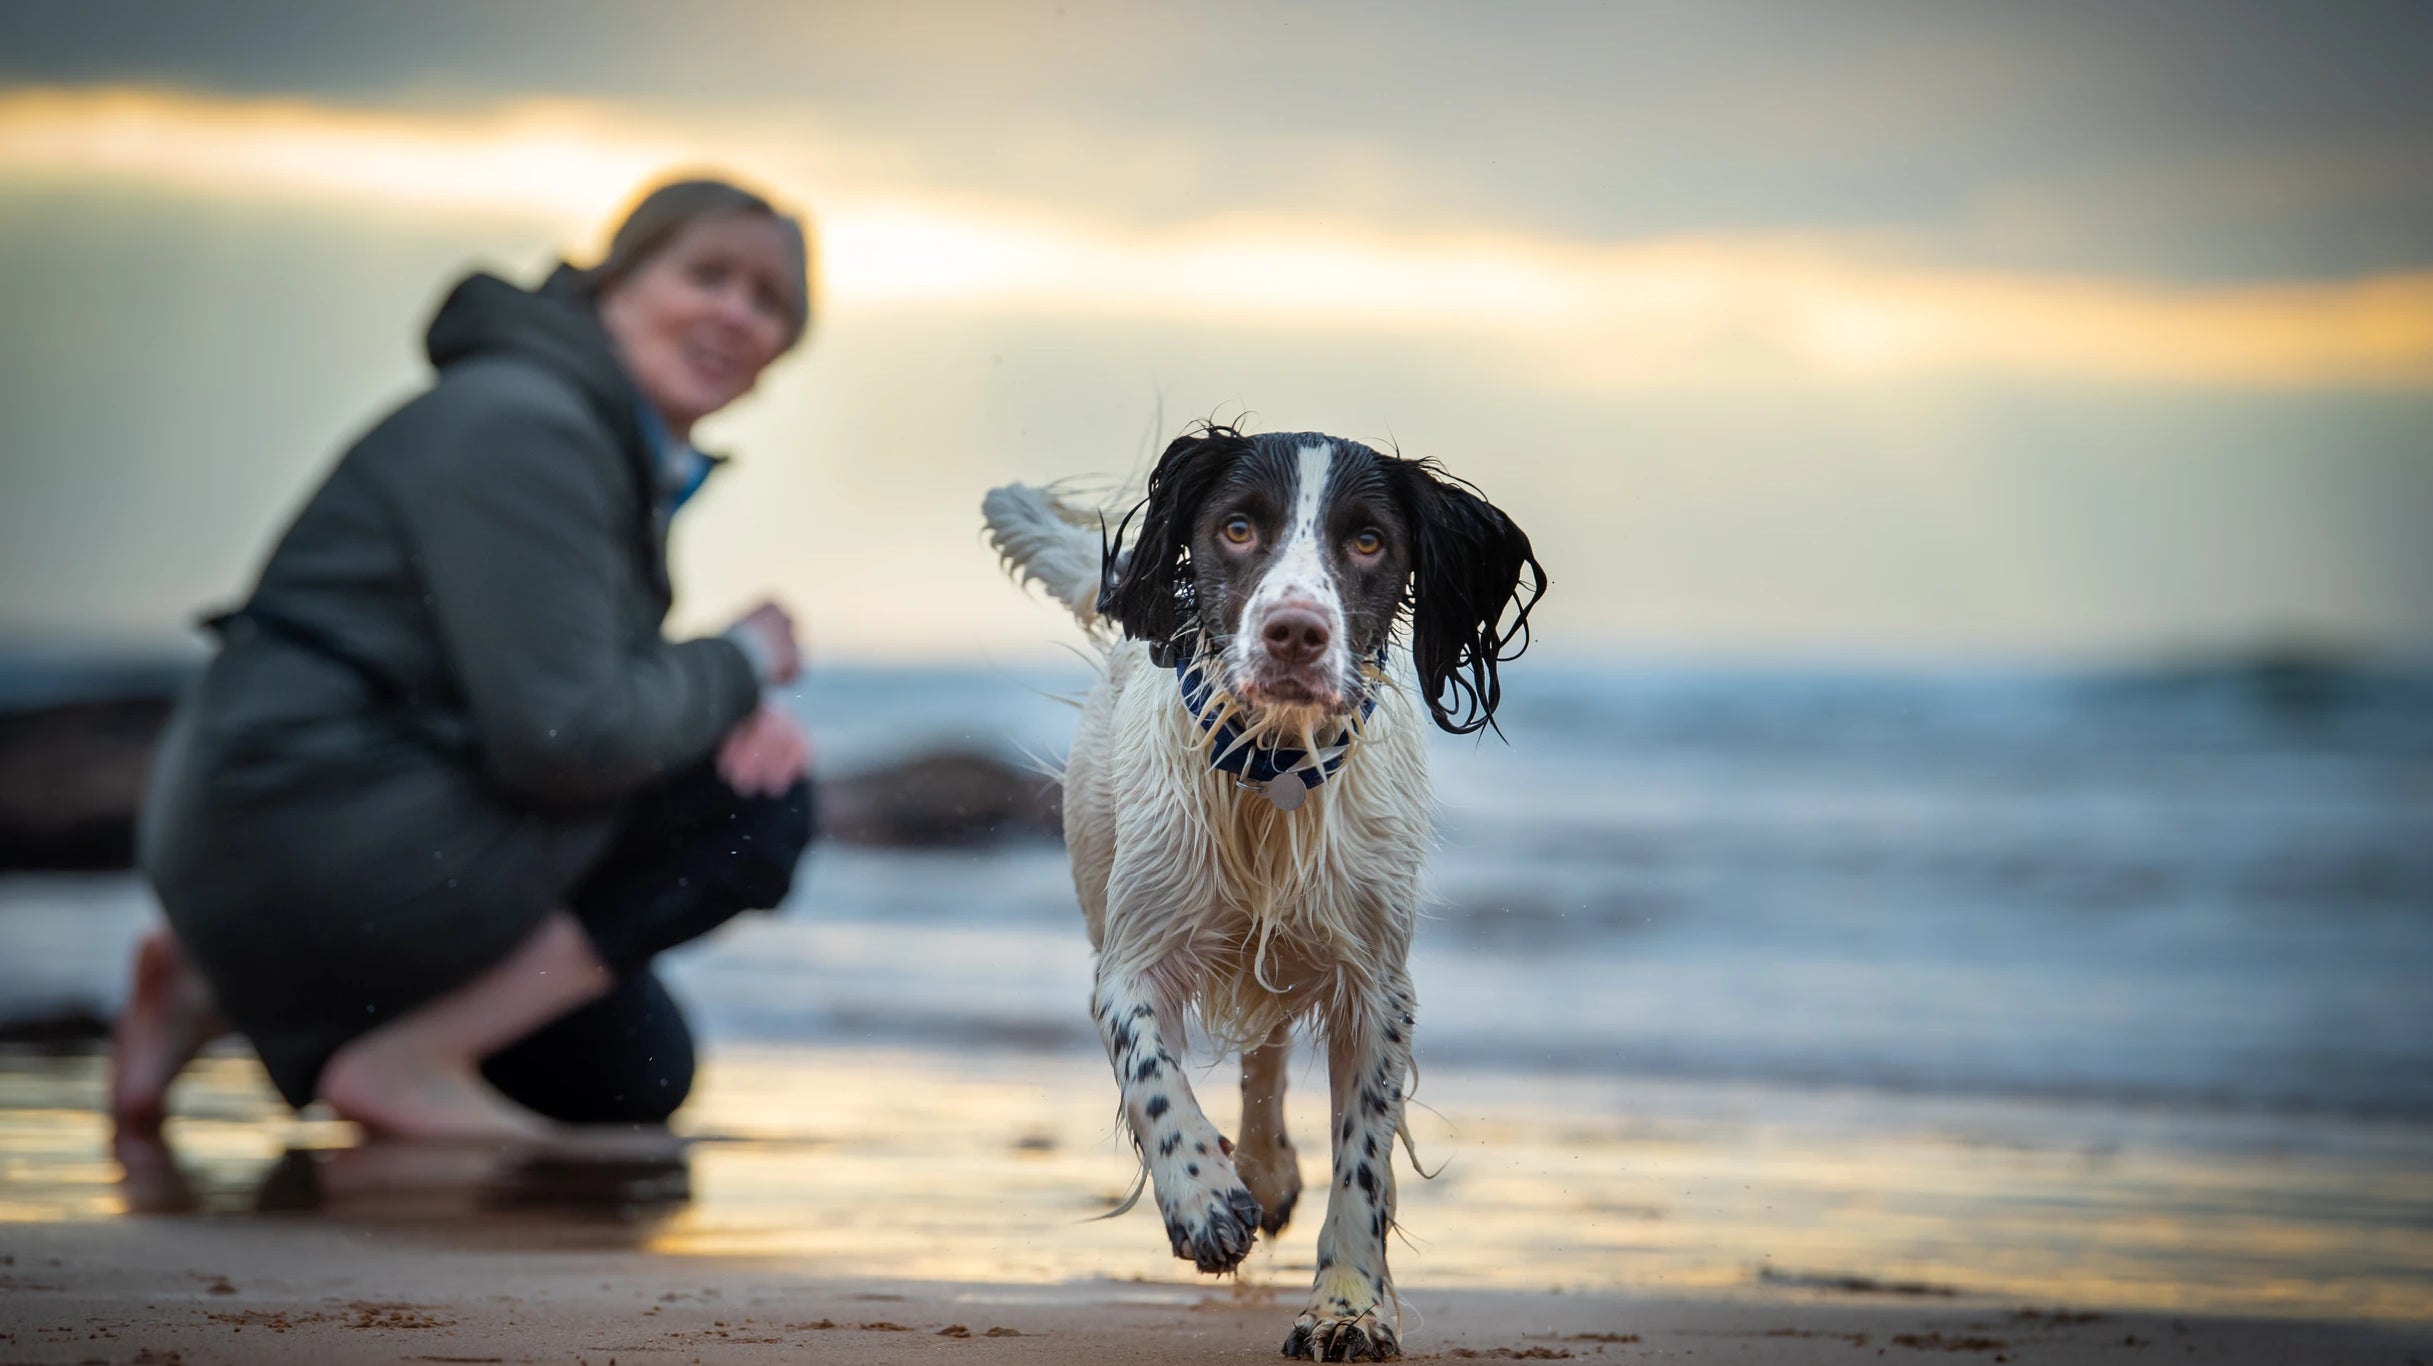 4 Things to consider before booking a photoshoot for your dog and top tips for success